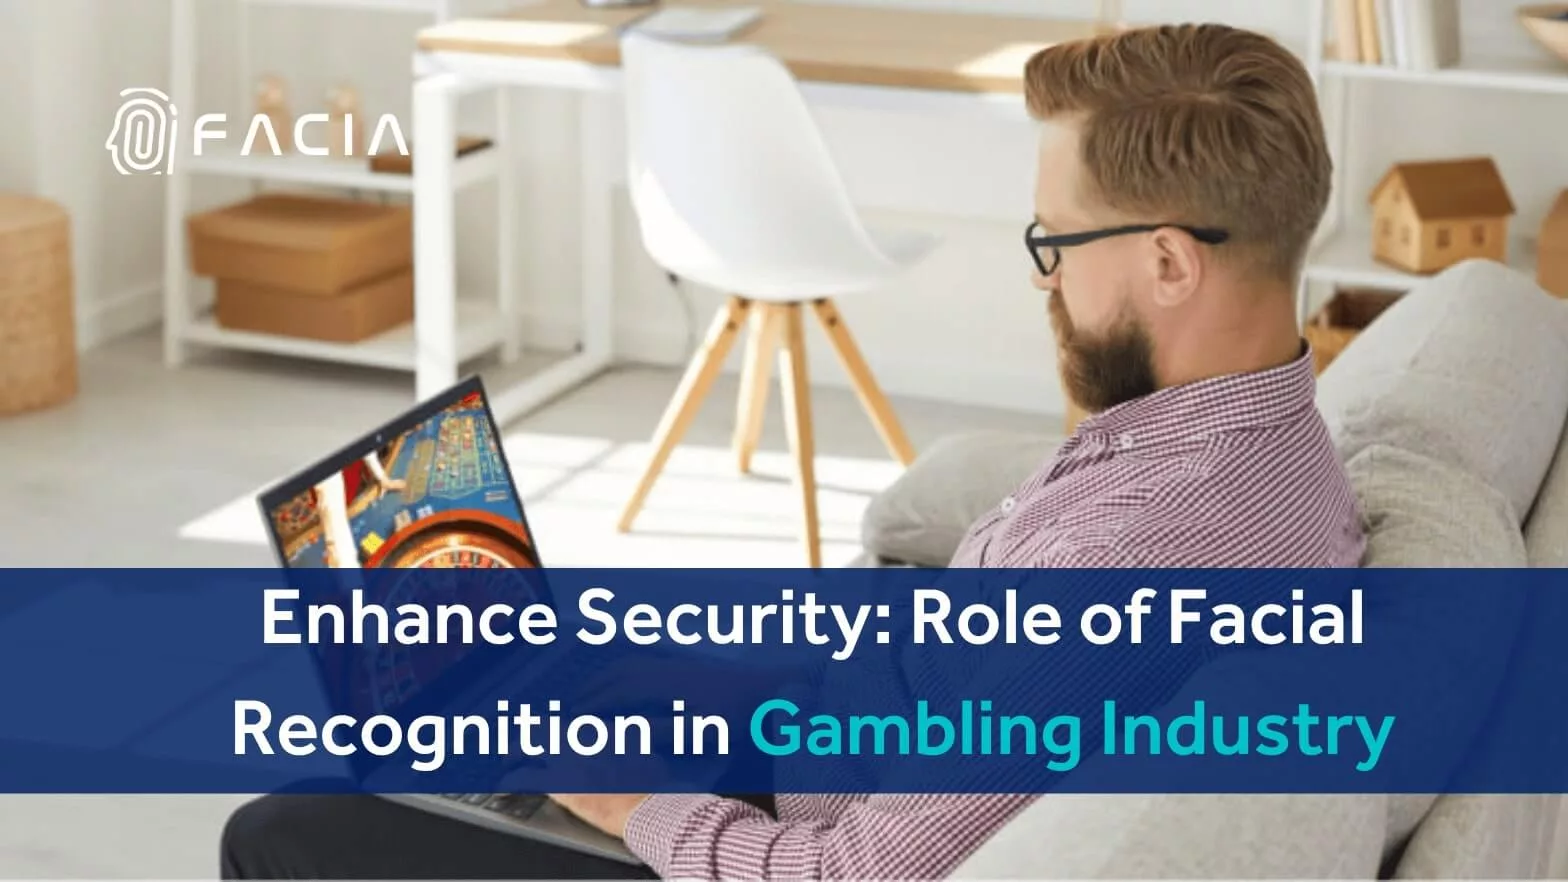 Facial Recognition Gambling Industry